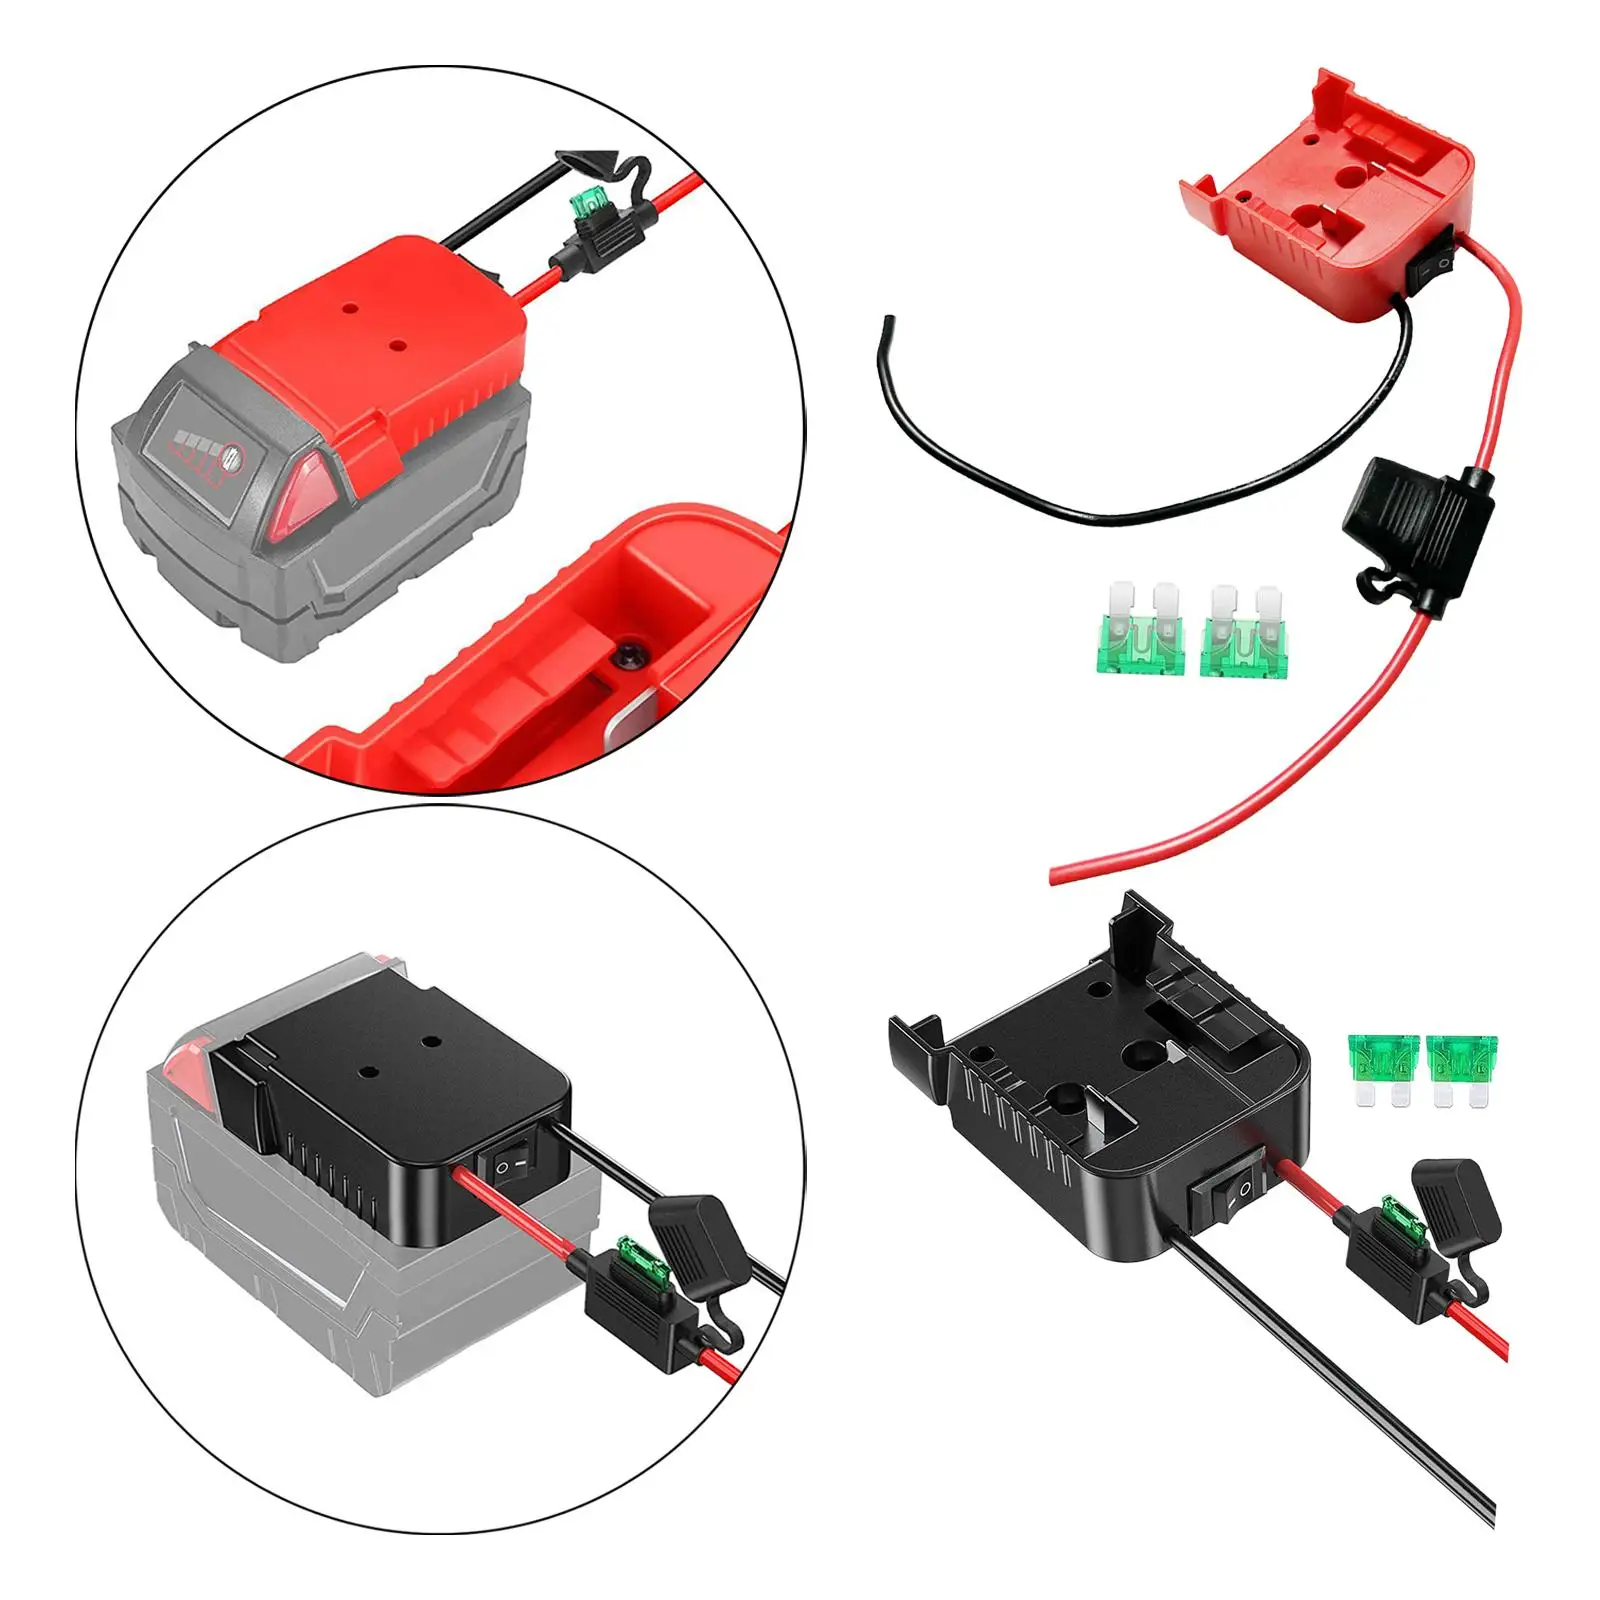 Battery Adapter Converter Accessories Power Compatible Adapter Conversion Interface toolset for M18